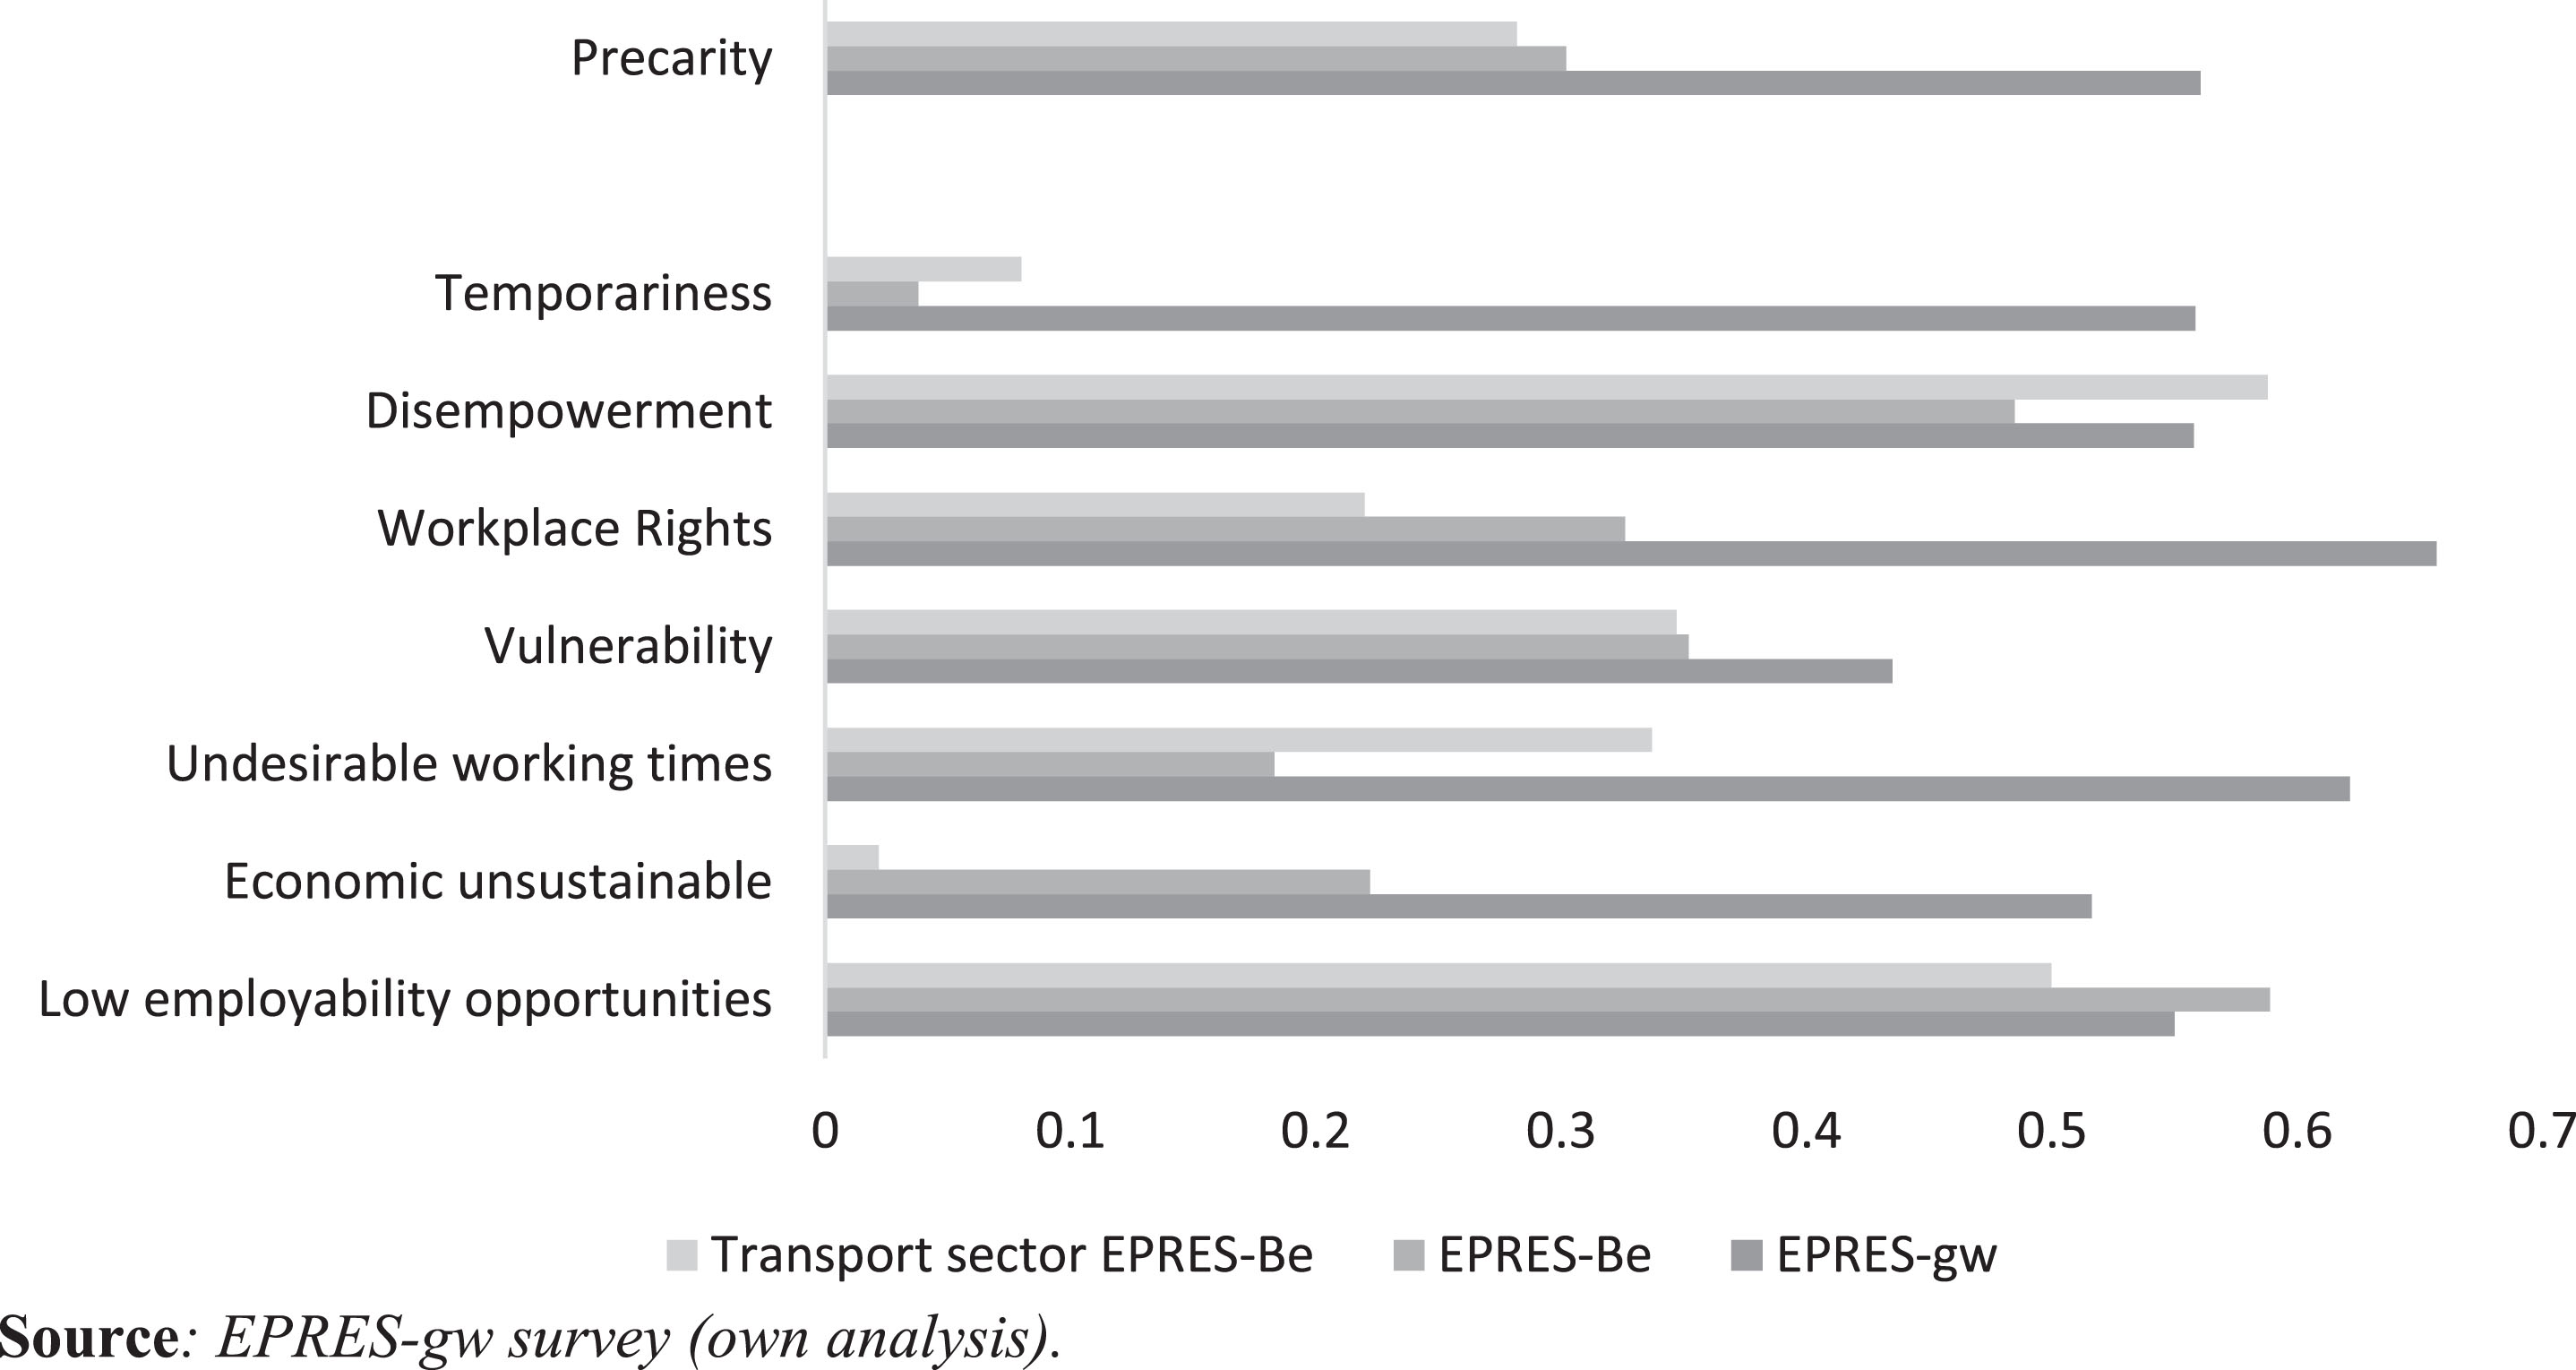 A comparison between EPRES-Be transport sector (n = 50), EPRES-Be (n = 2,332) and EPRES-gw (n = 99).